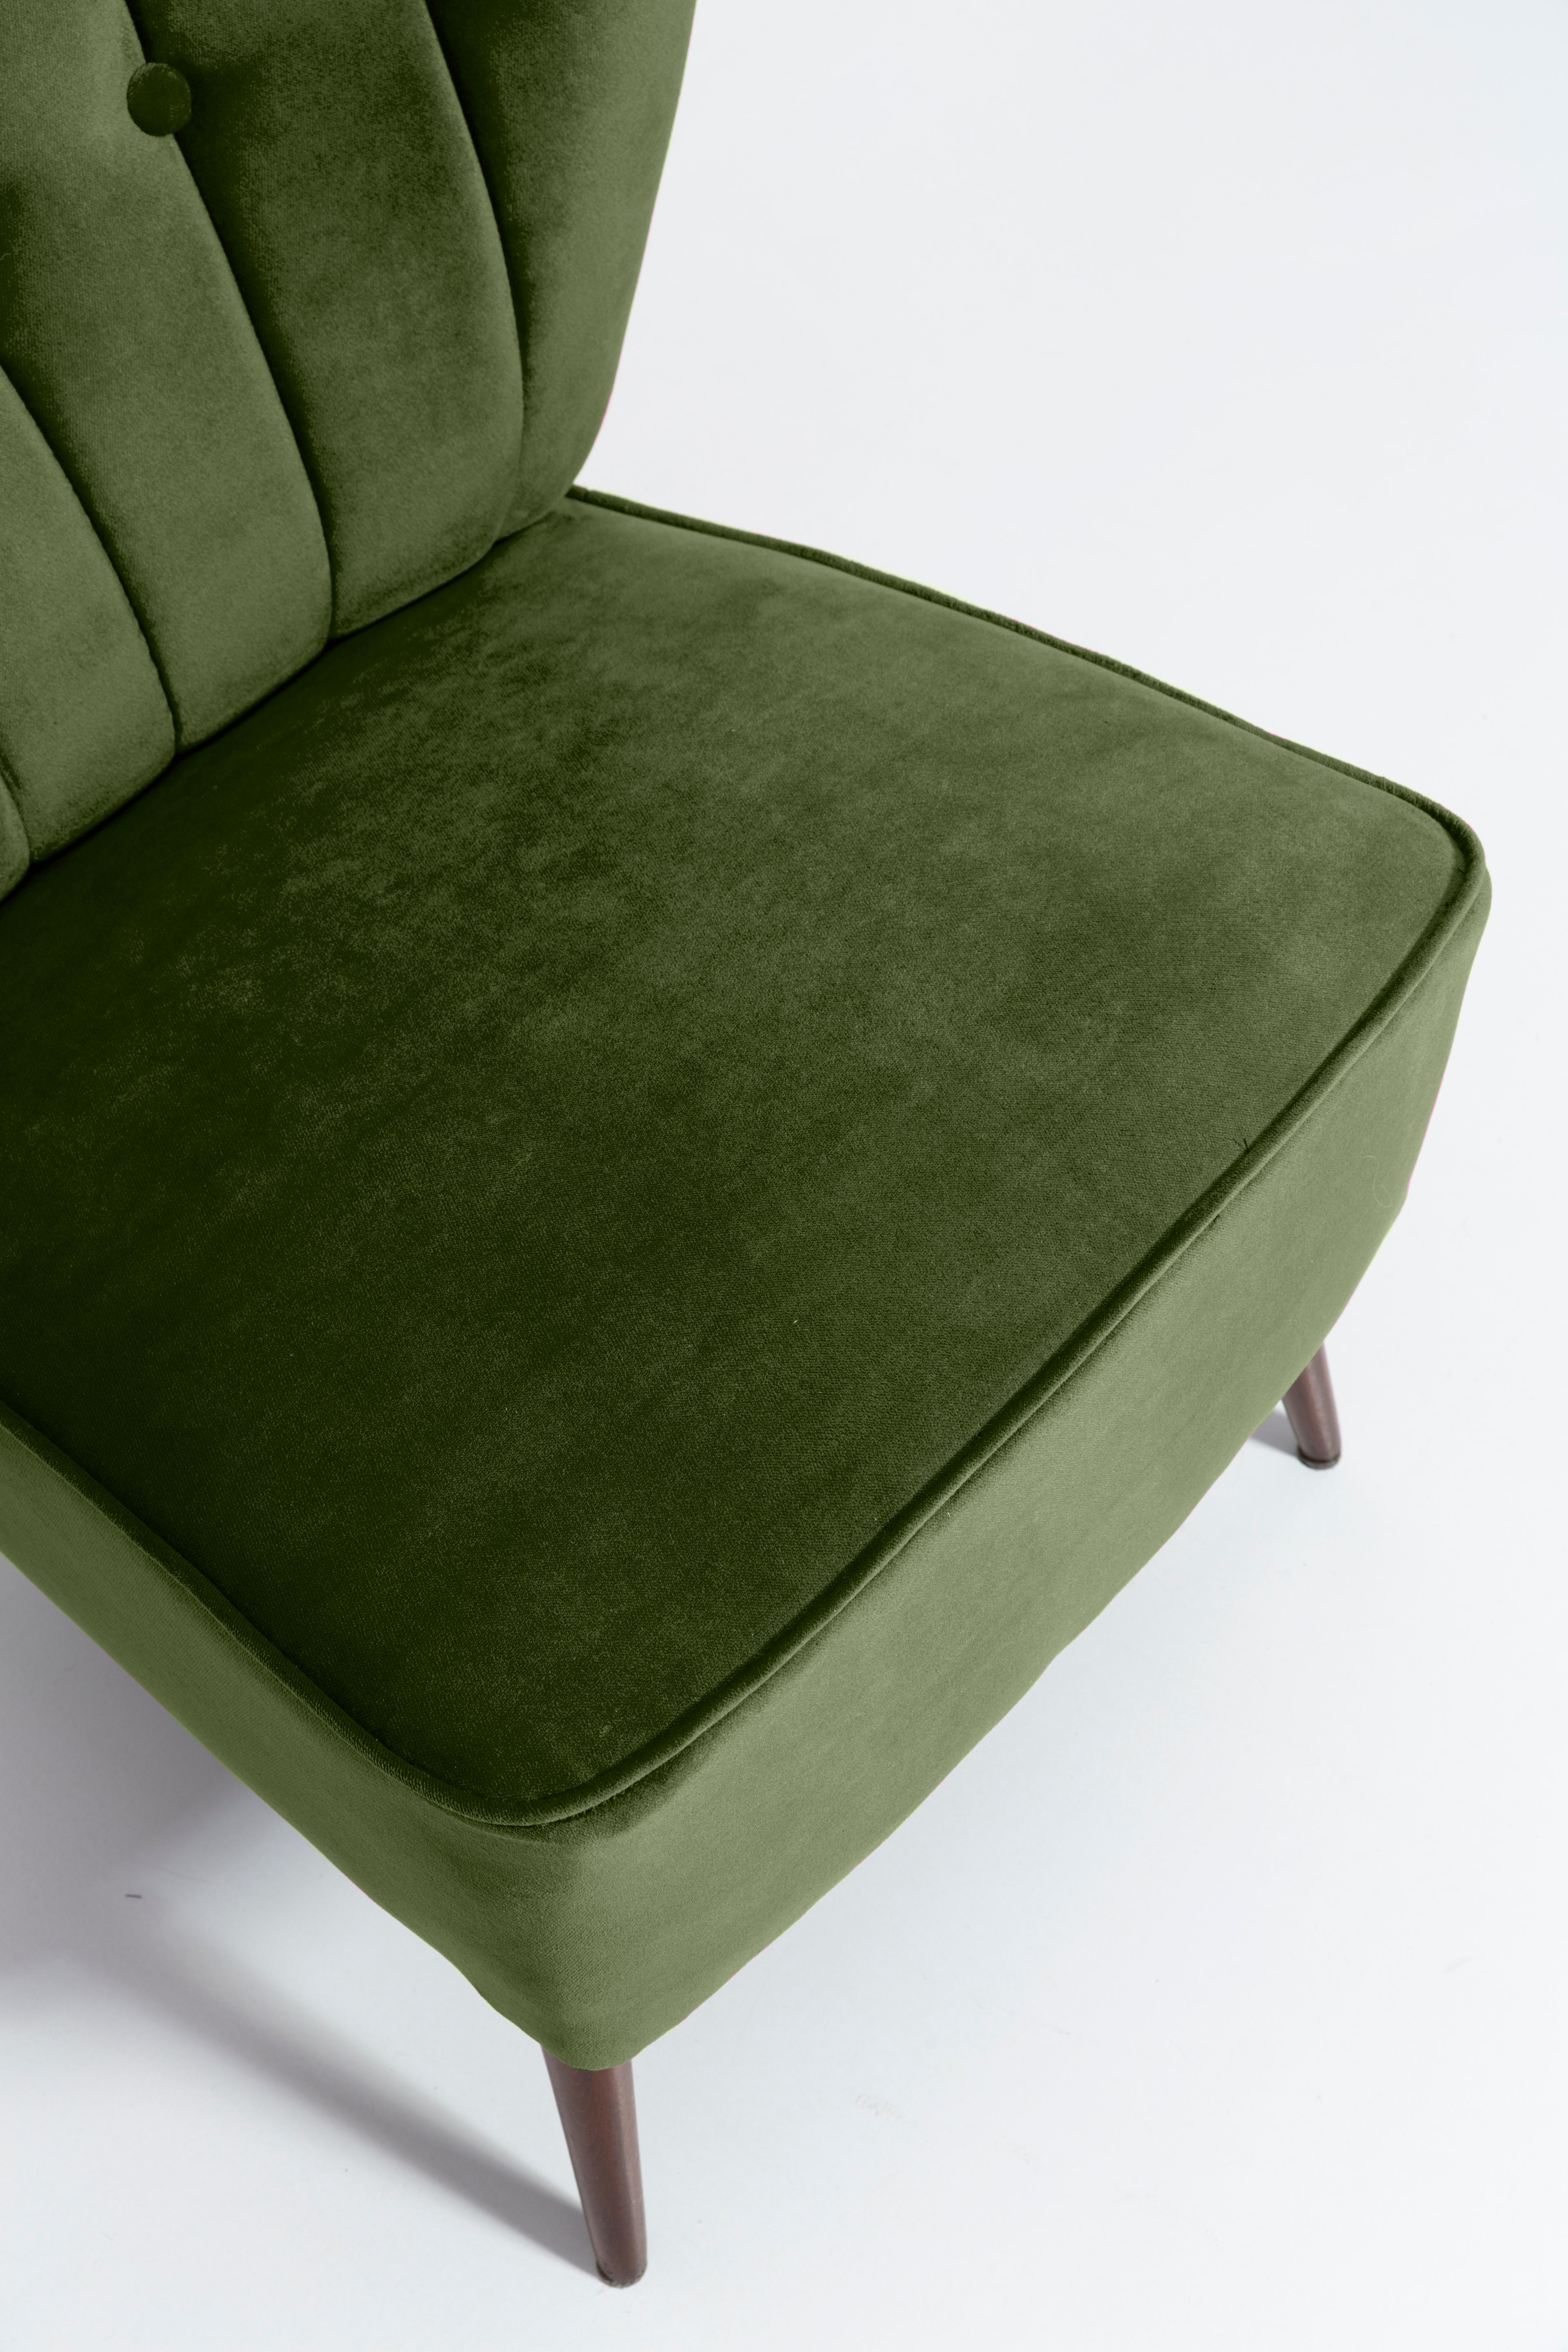 Set of Two Mid-Century Green Velvet Club Armchairs, Europe, 1960s For Sale 4